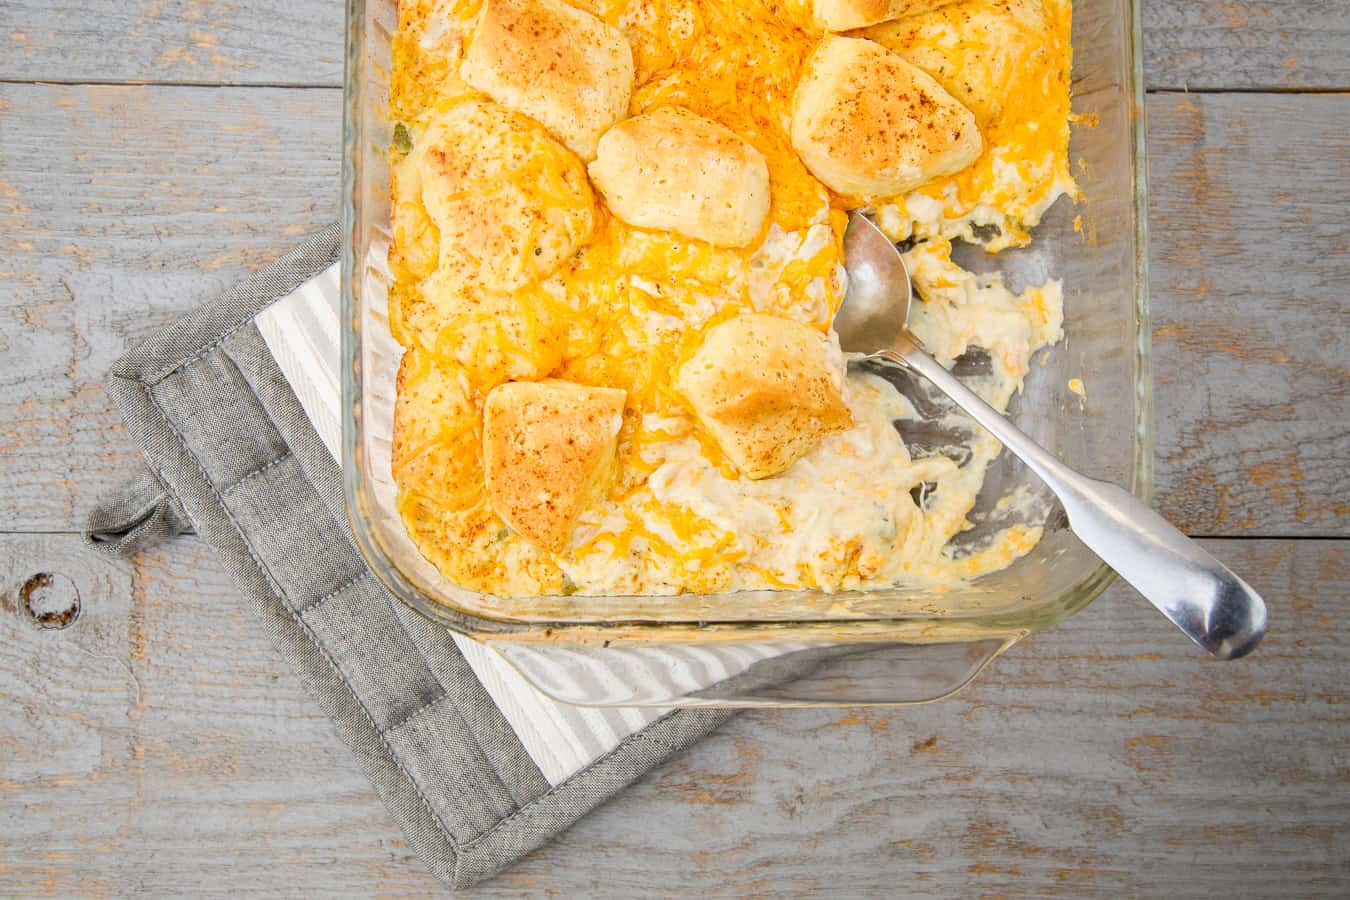 This cheesy chicken pot pie biscuit casserole is SO GOOD. If you’re pinched for time, keep this 30-minute cheesy chicken biscuit casserole simple with ingredients from your pantry. This quick and easy chicken bake uses cream of chicken soup and sour cream, so it is amazingly creamy. *This is a keeper! My kids (and husband!) love it.